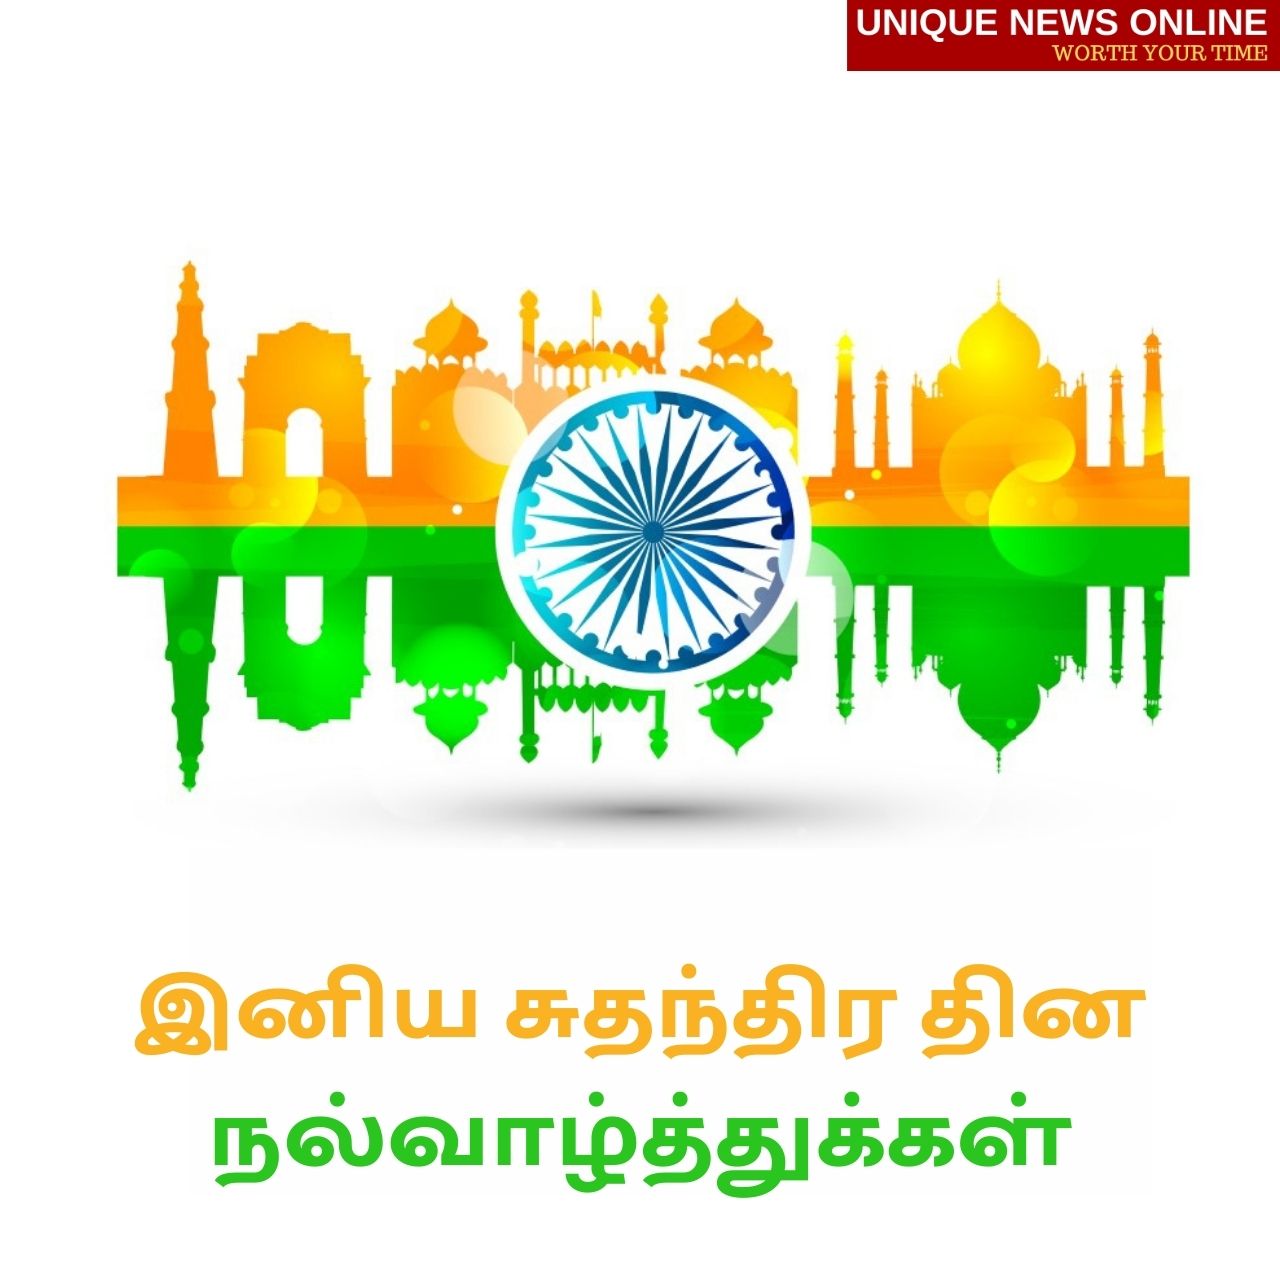 Independence Day 2021 Tamil and Malayalam Greetings, Messages, Wishes, HD Images, Status, Slogans, Quotes, and DP for WhatsApp